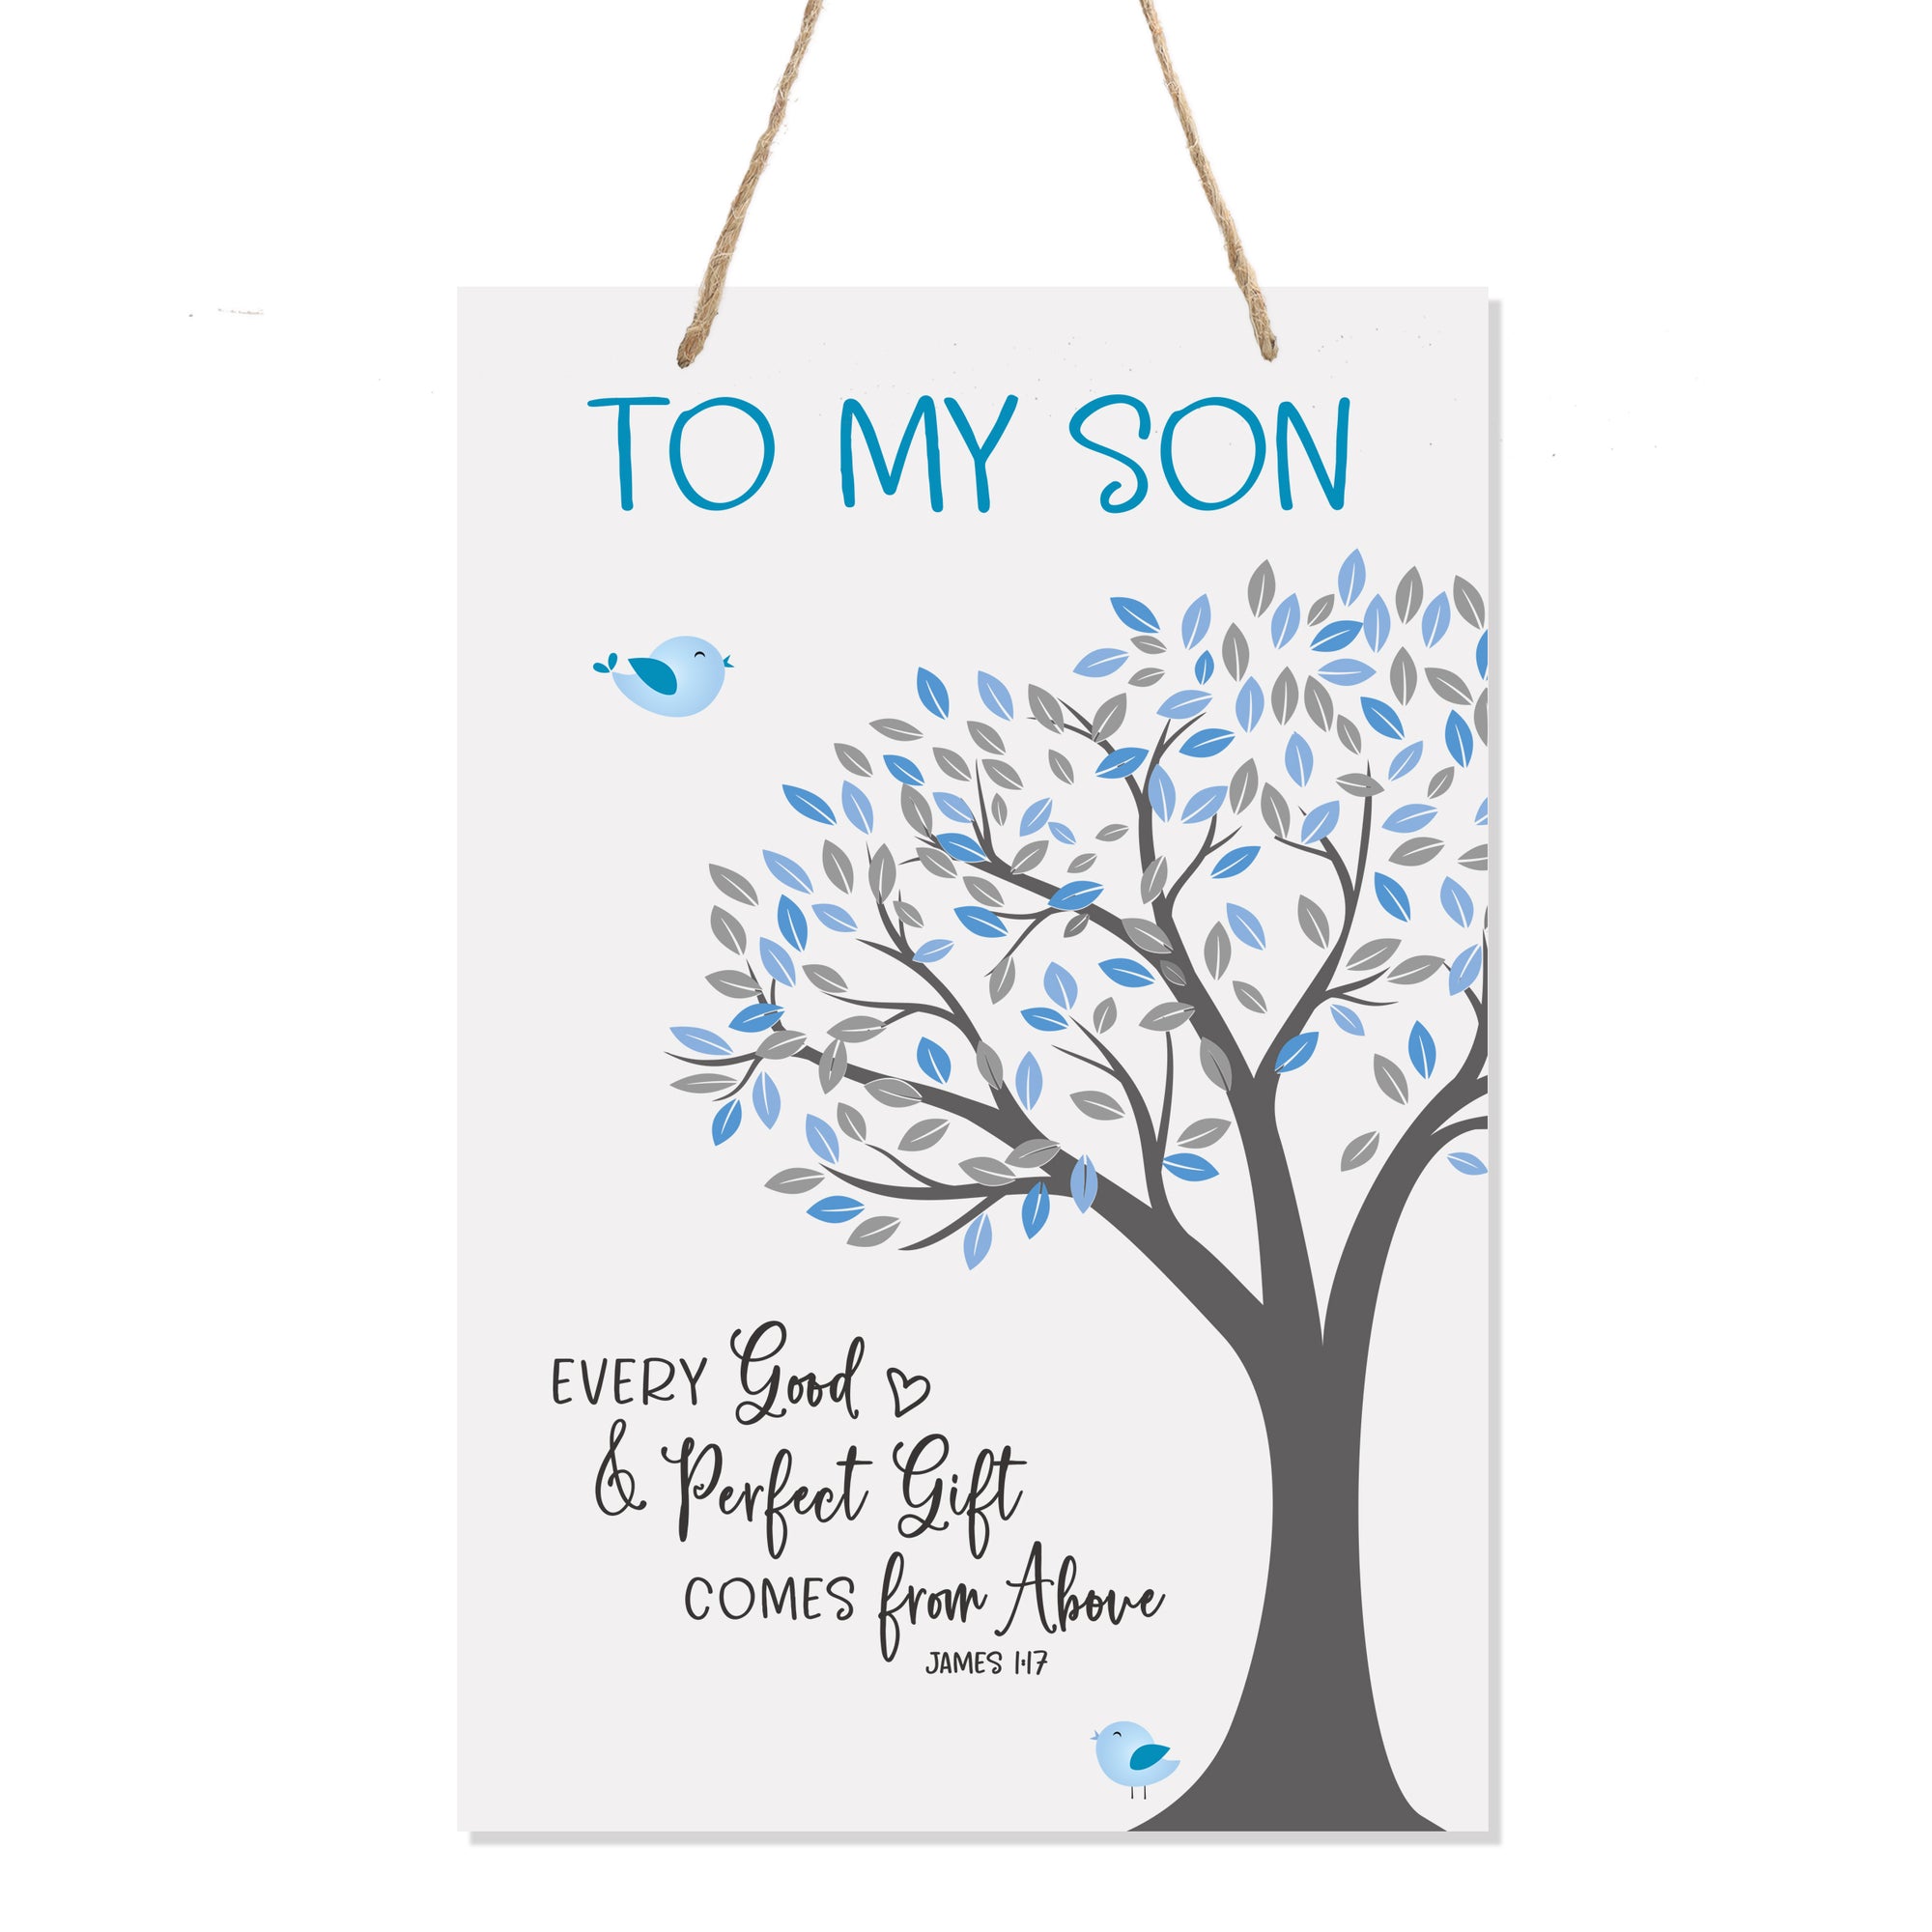 Nursery Decor For My Son or Daughter Girls and Boys Happy Birthday Wishes Gift Ideas Wall Hanging Sign From Mom and Dad bedroom nursery celebrate decorations grandson granddaughter